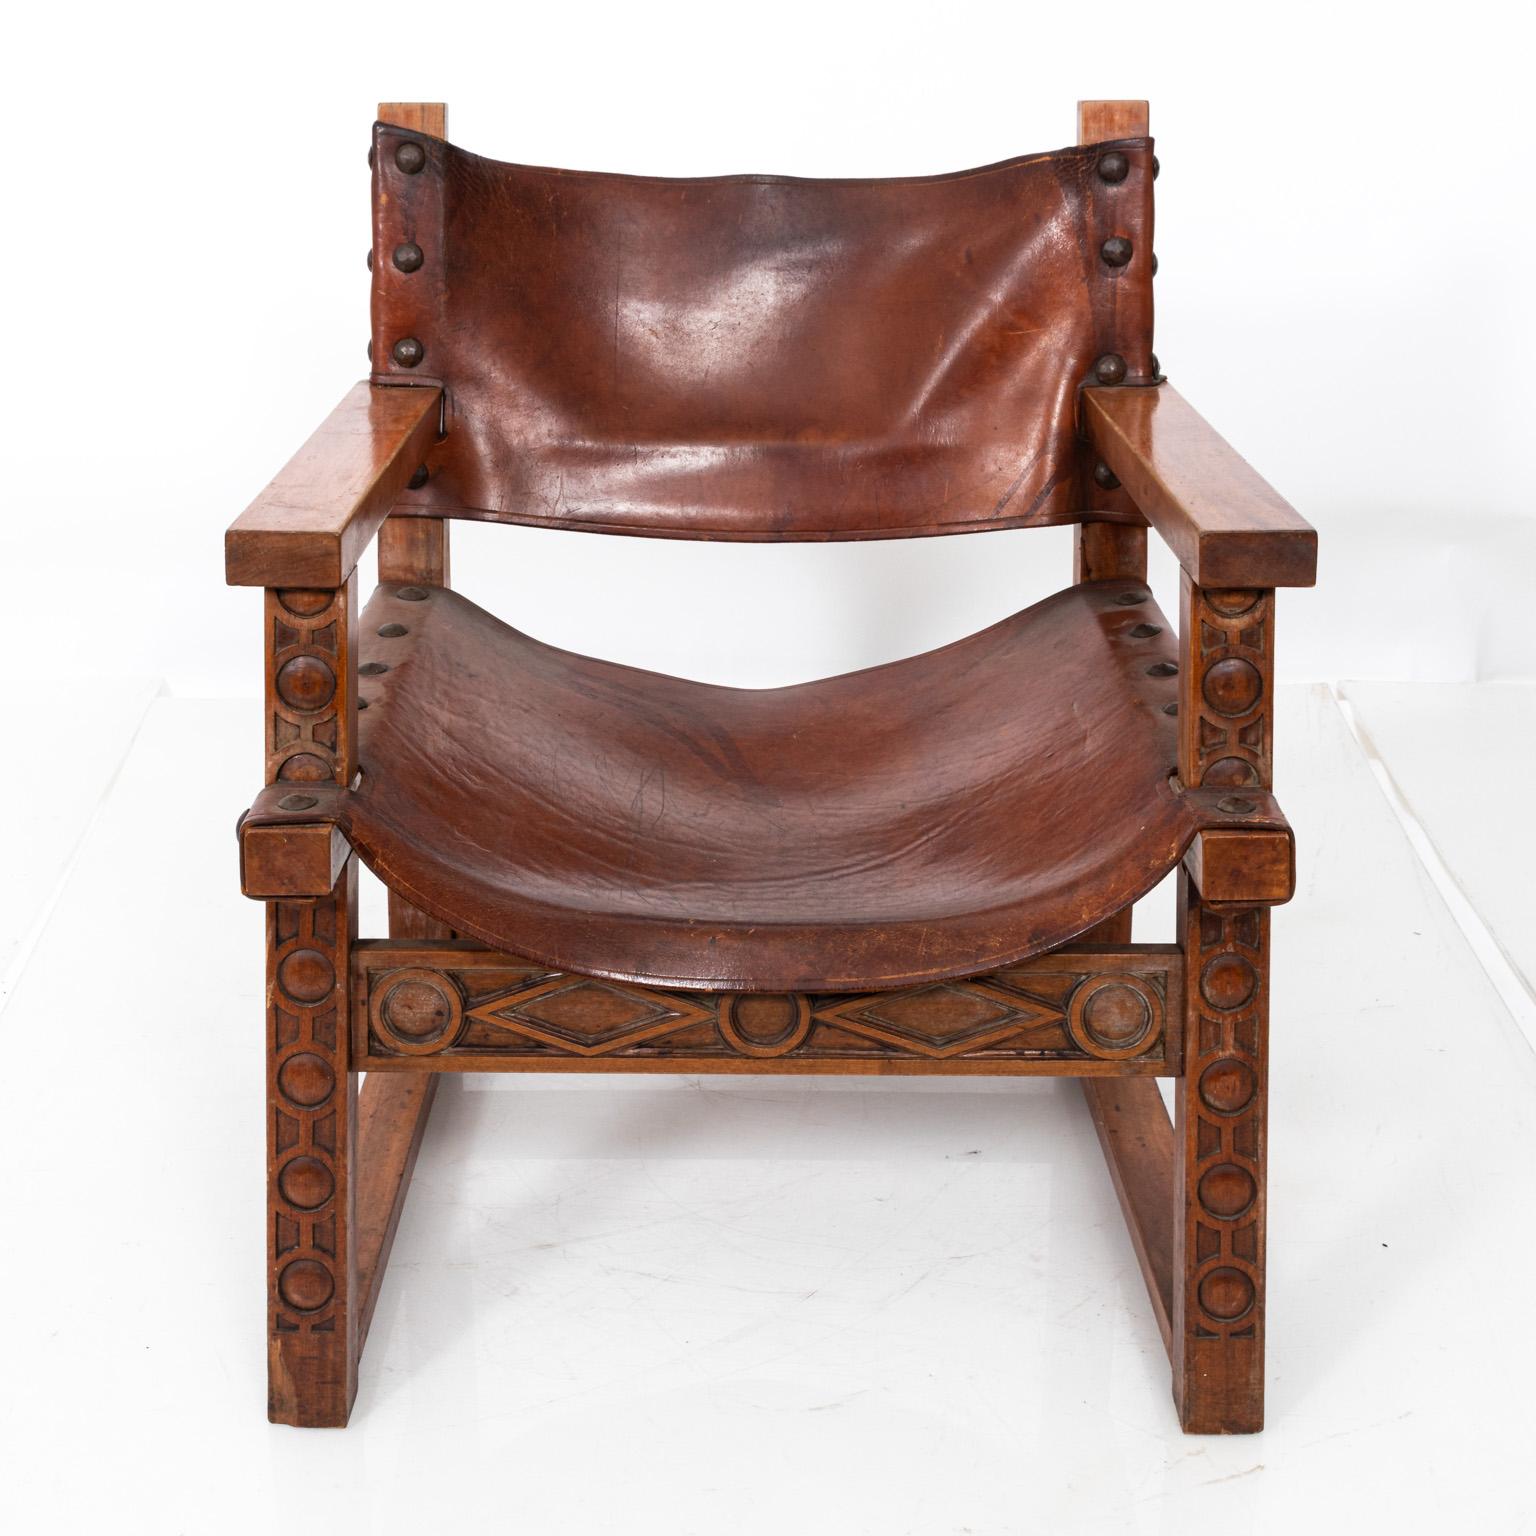 Spanish leather armchair with metal nailhead trim and carved wood frame featuring geometric shapes. Please note of wear consistent with age including some discoloration and minor tears in the leather.